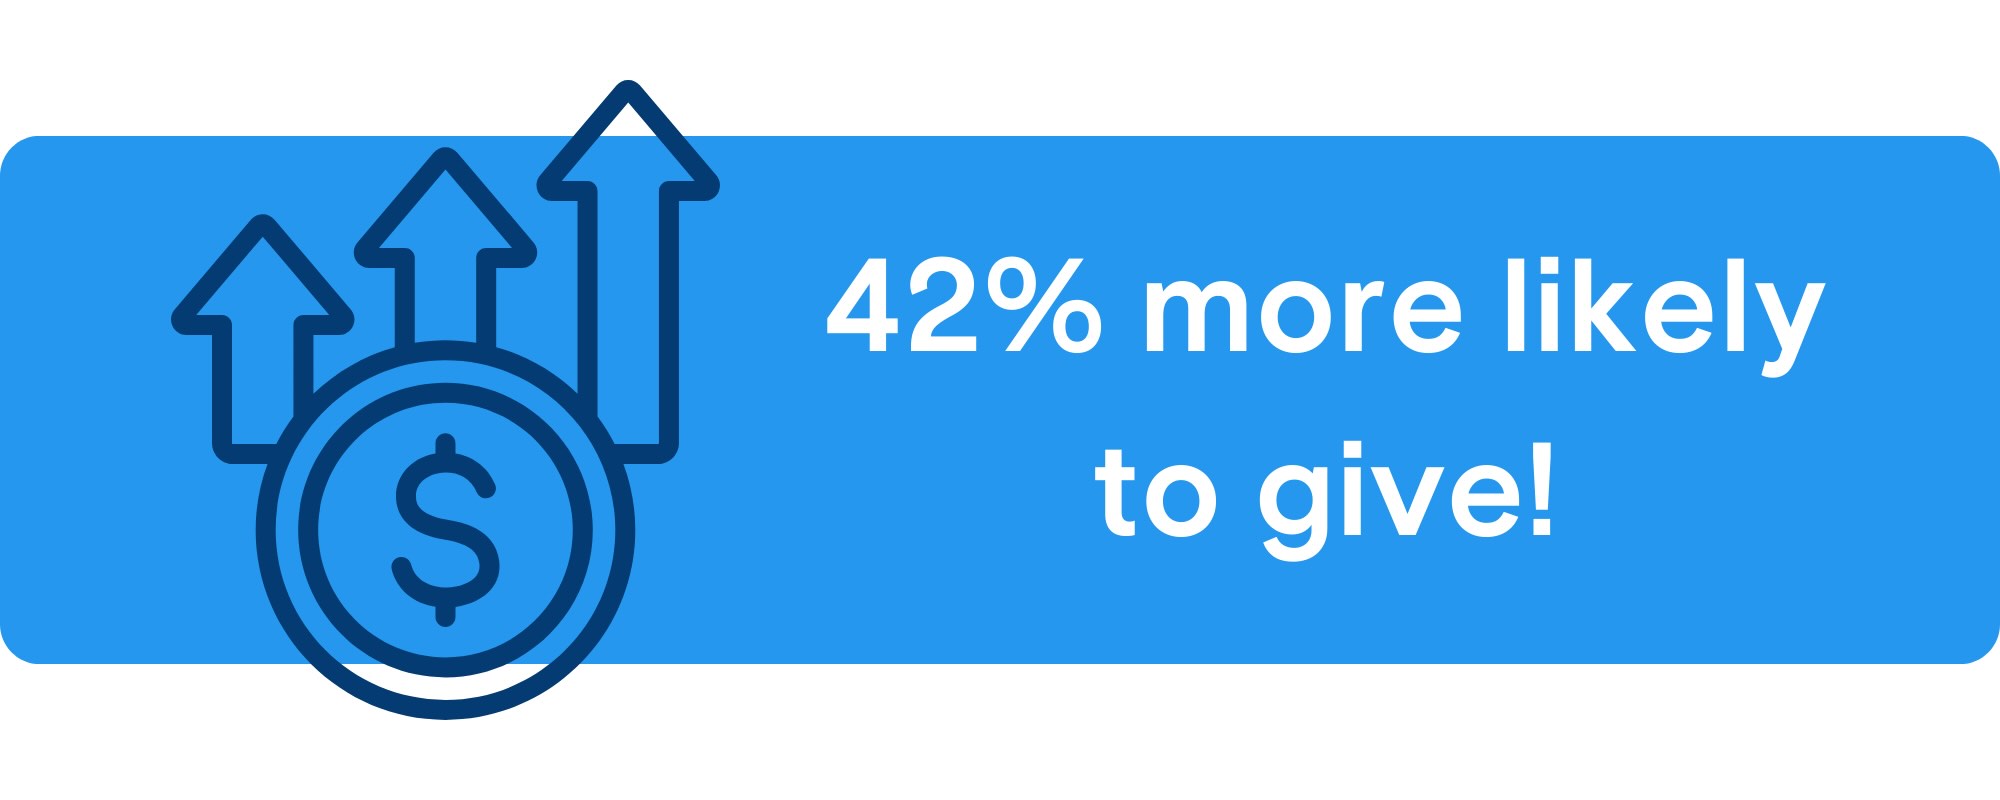 Recurring donors are 42% more likely to give a one-time donation